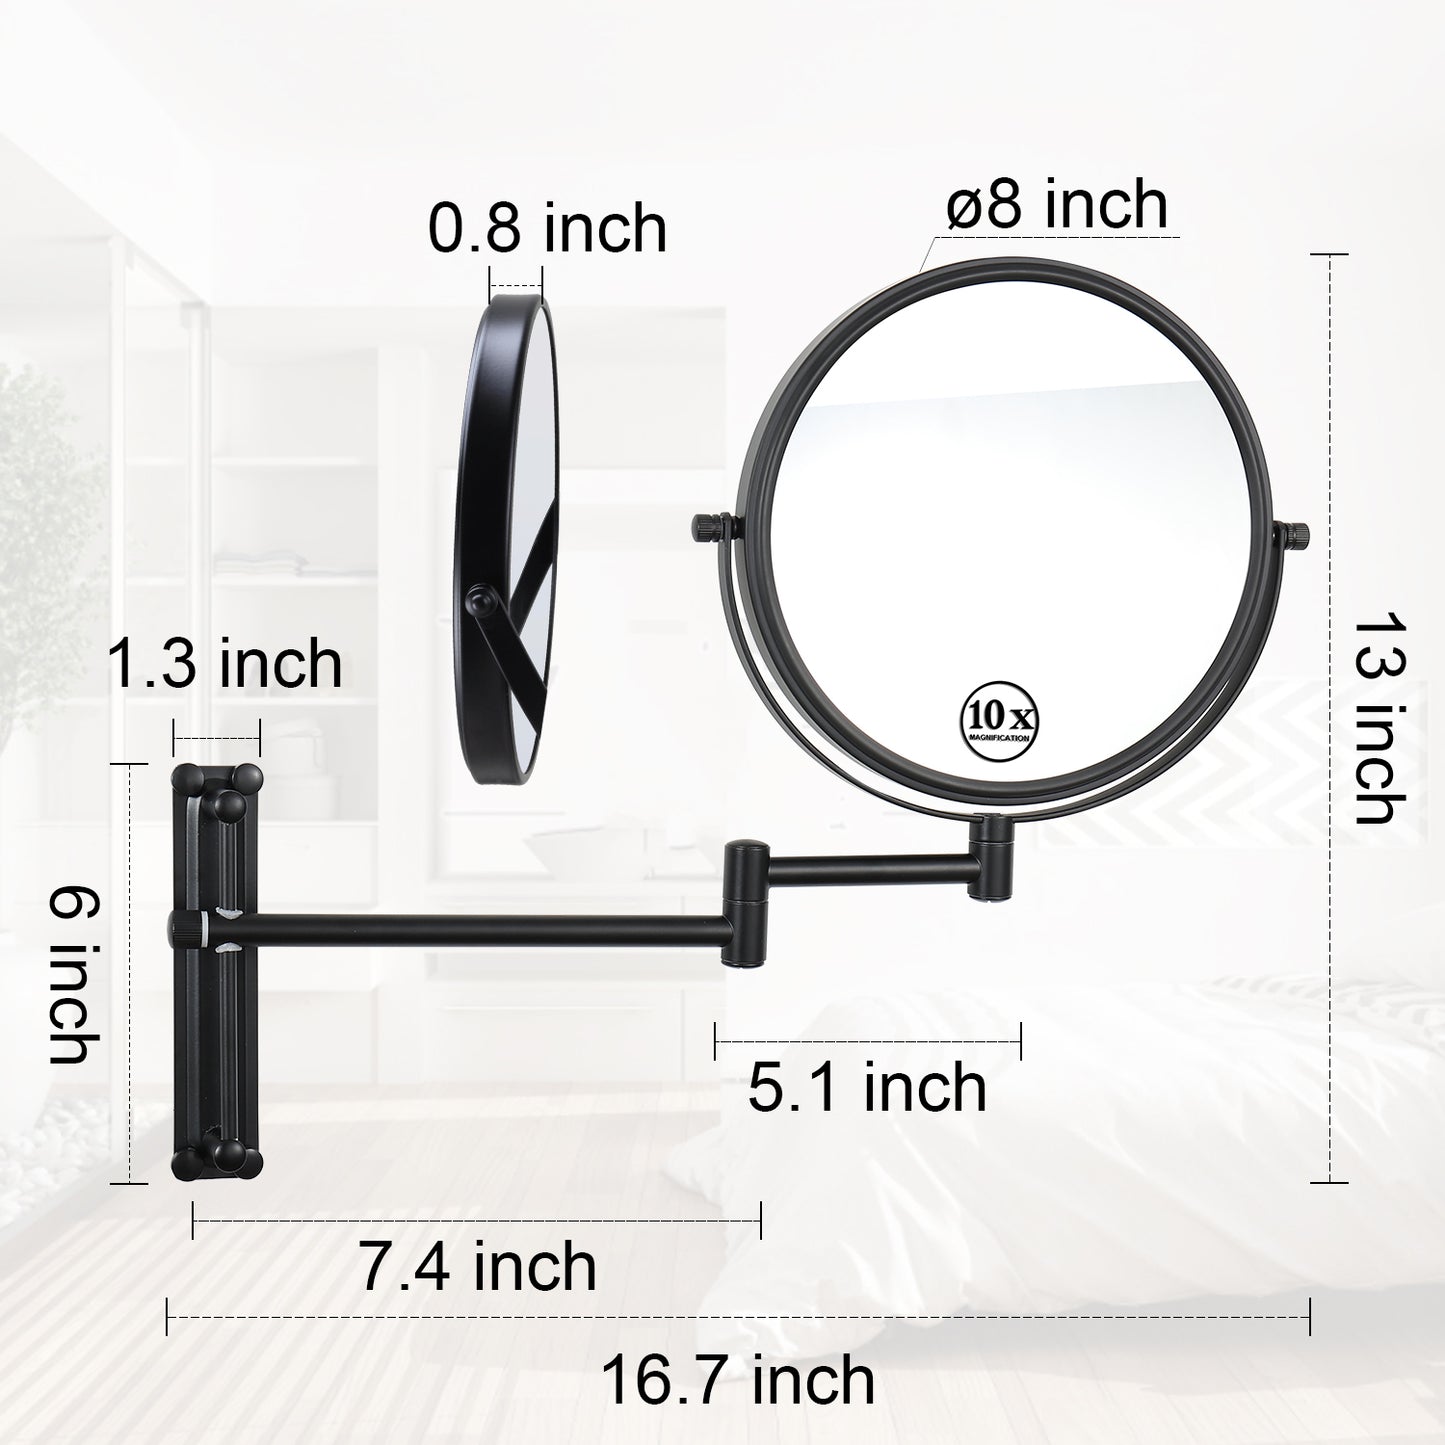 8-inch Wall Mounted Makeup Vanity Mirror, Height Adjustable, 1X / 10X Magnification Mirror, 360 degree Swivel with Extension Arm (Black)